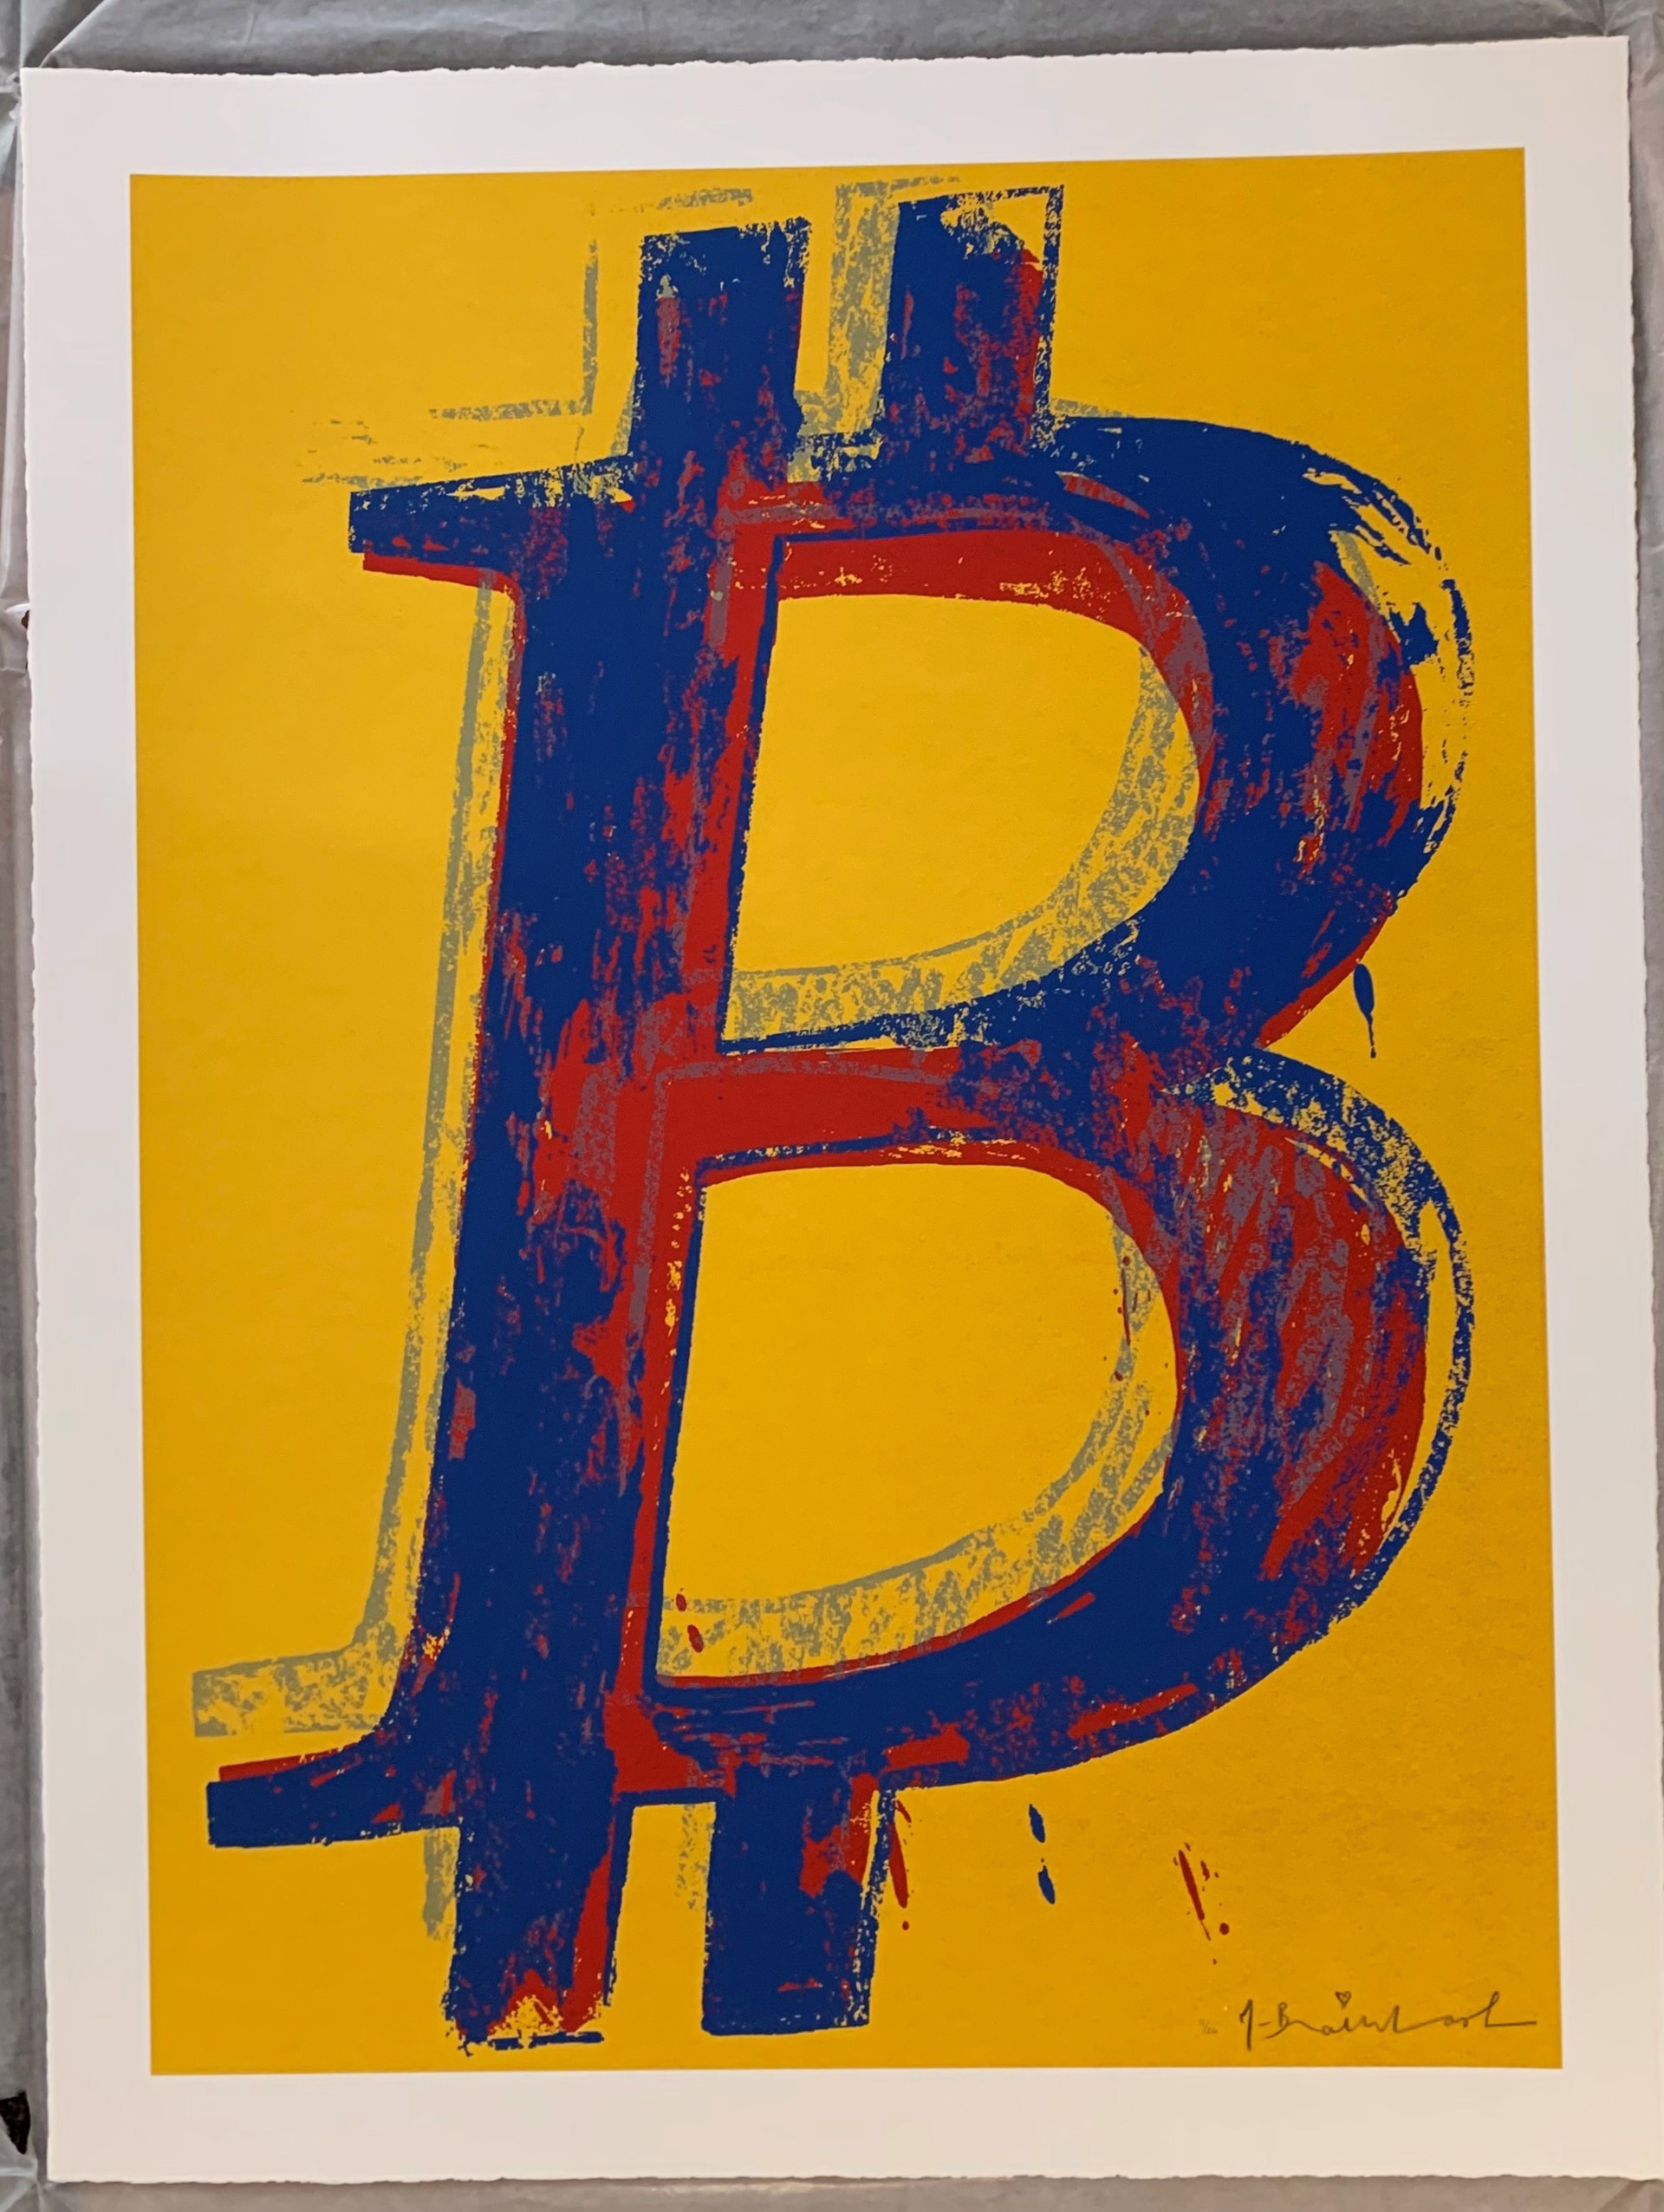 Bitcoin Suite, complete set of 8 prints by Mr. Brainwash